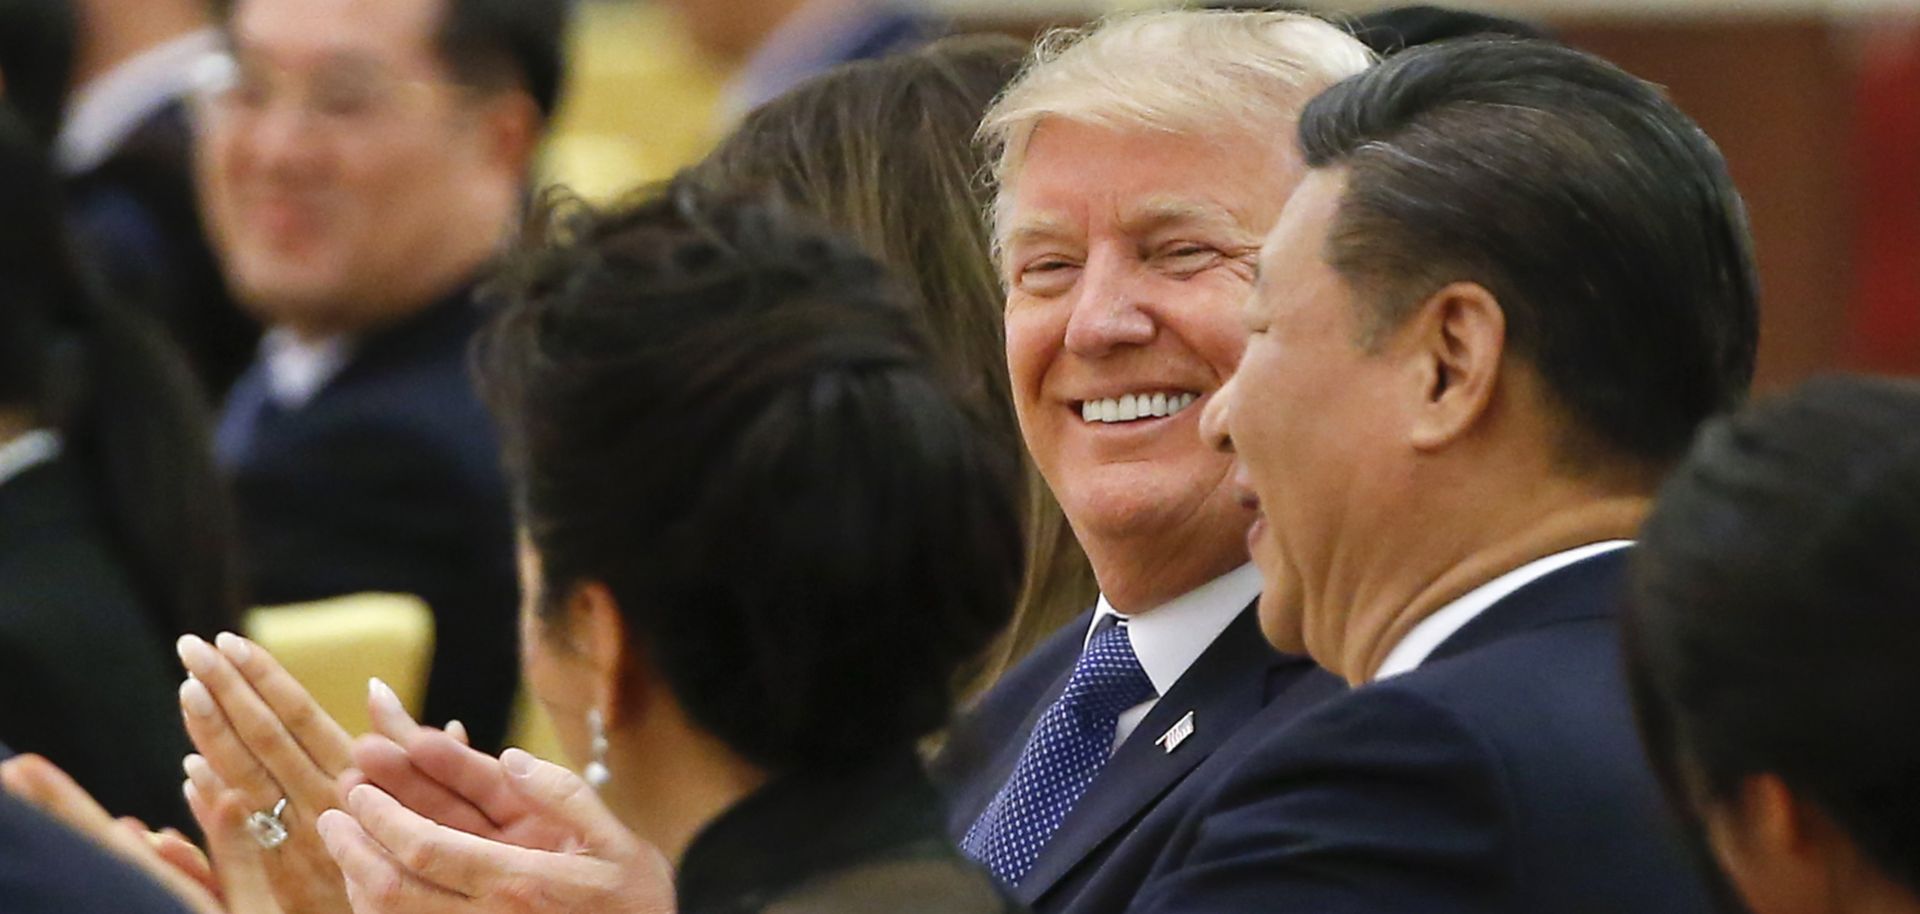 U.S. President Donald Trump attends a state dinner hosted by Chinese President Xi Jinping in 2017.